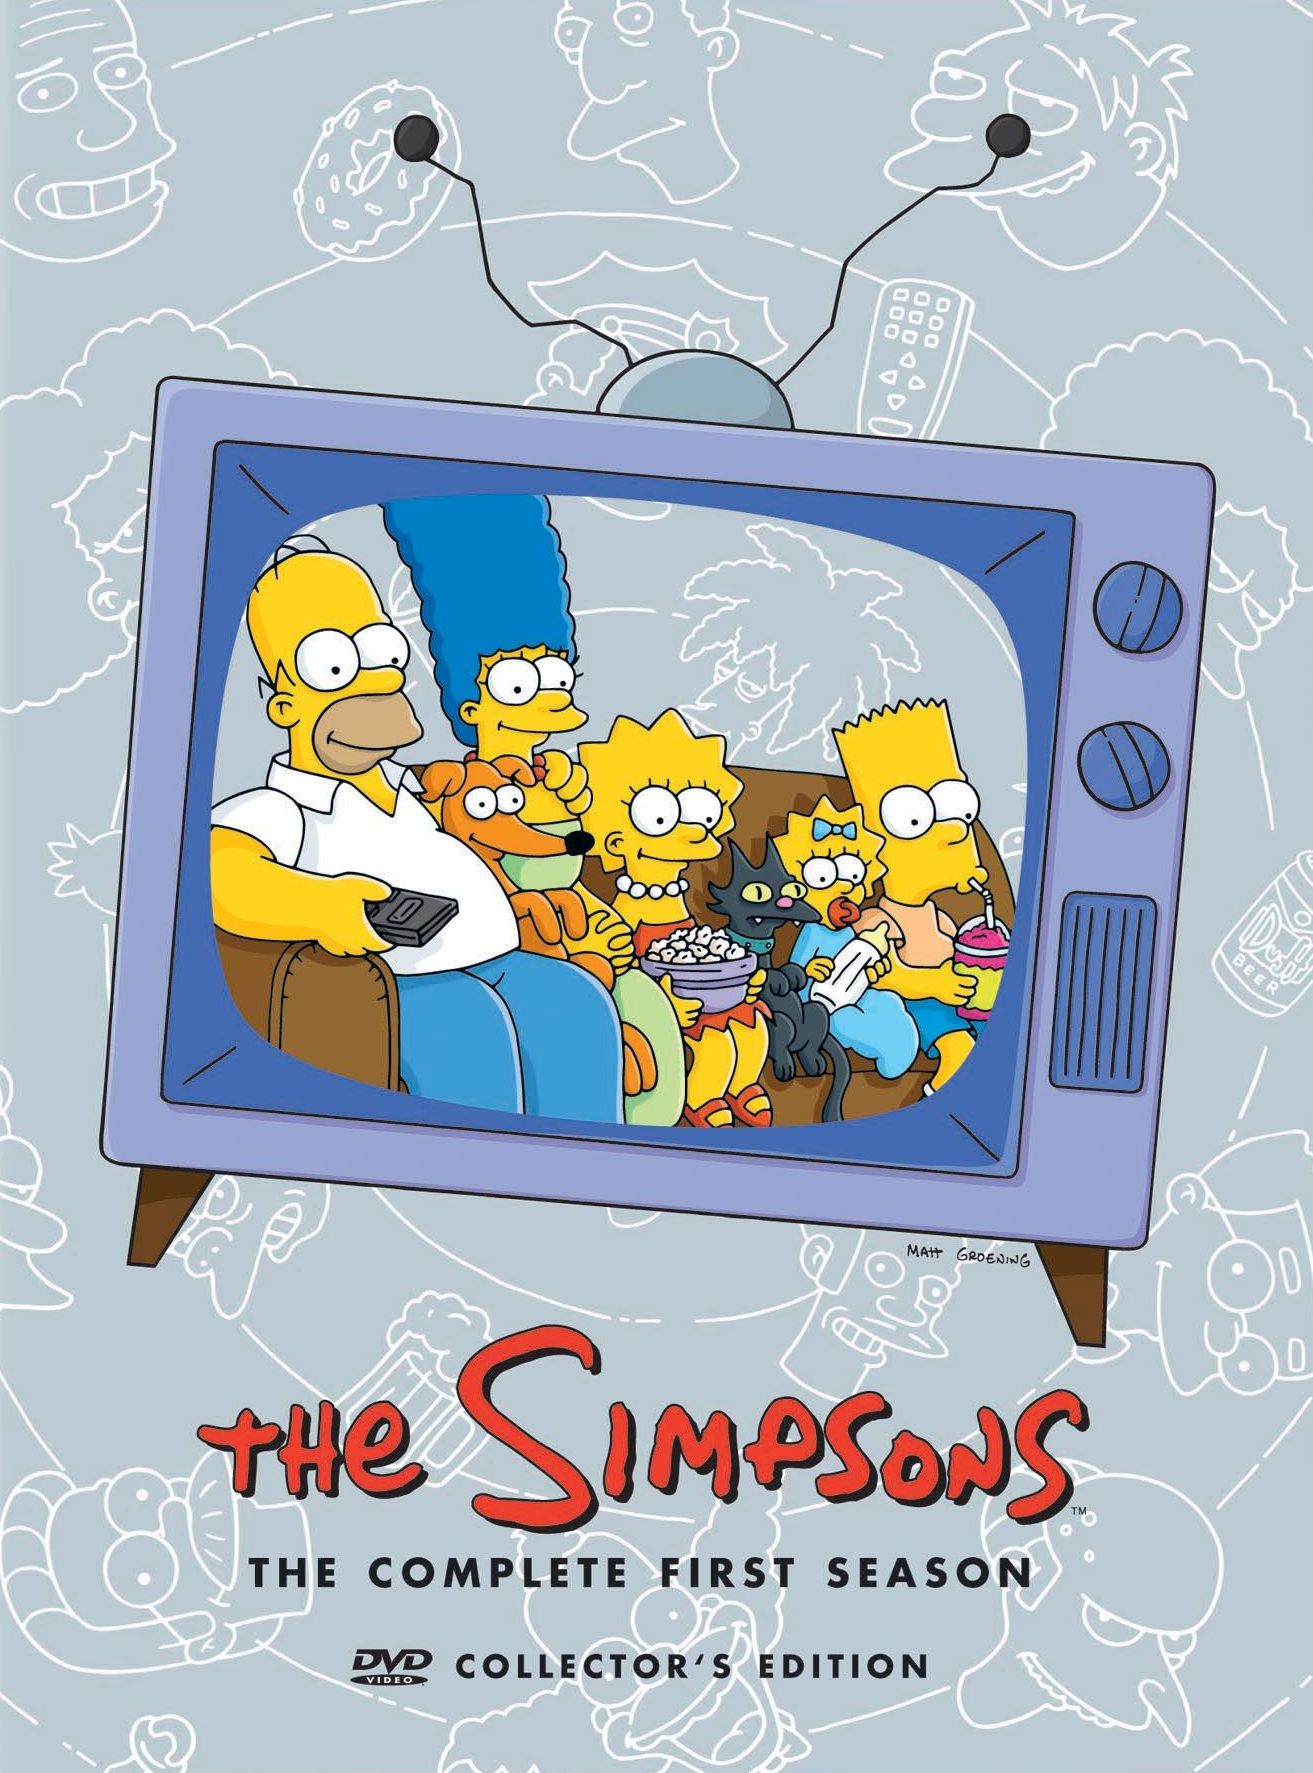 The Complete First Season, Simpsons Wiki